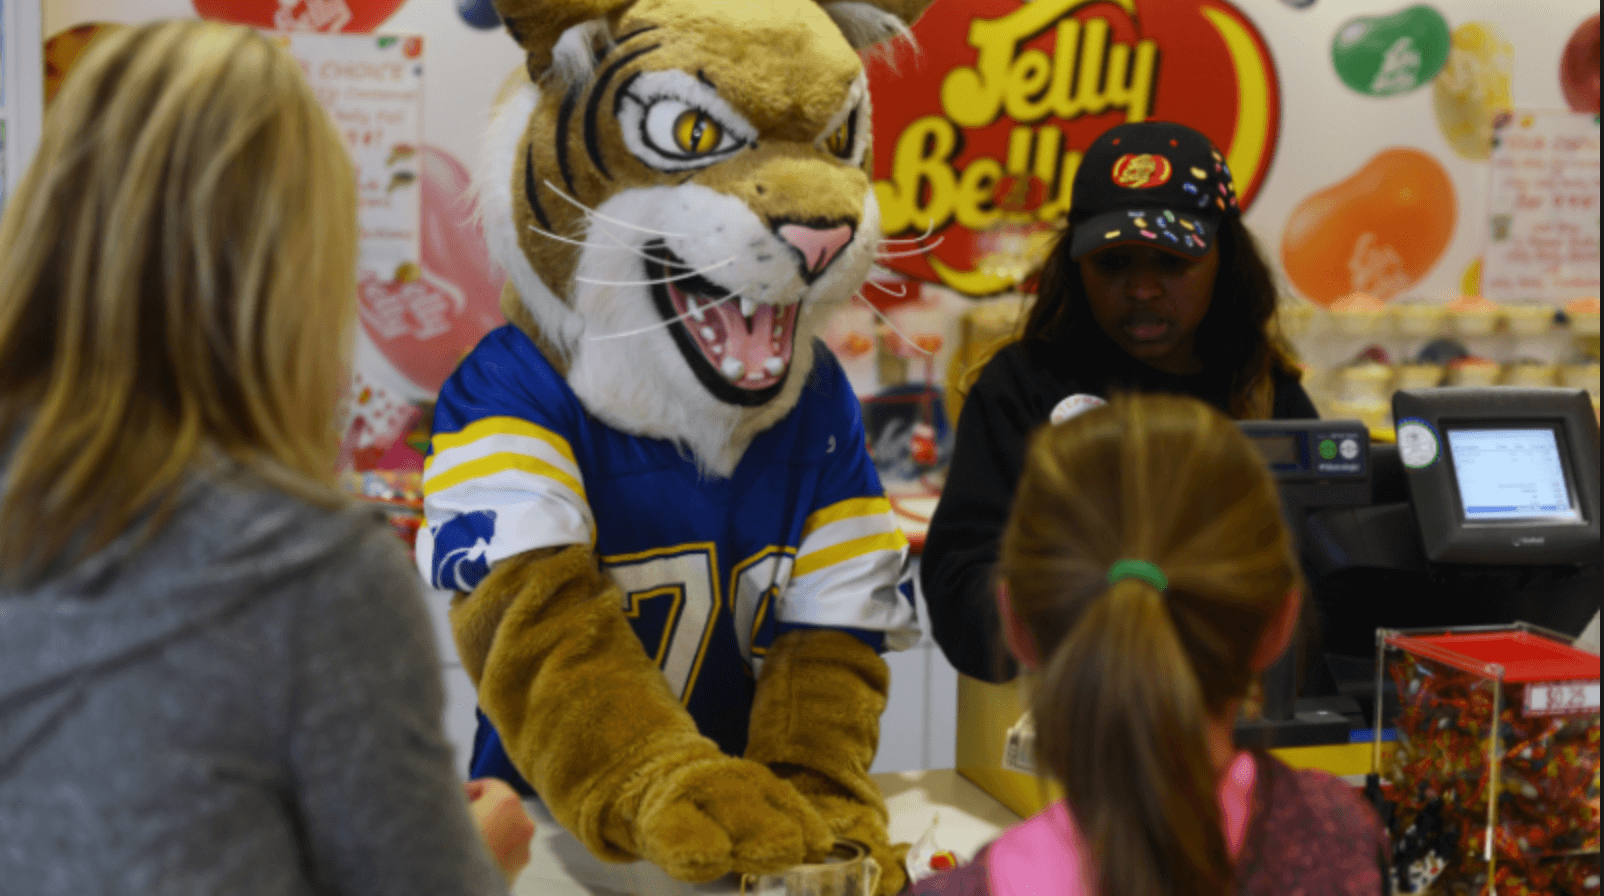 Mascots are coming to Jelly Belly on Aug. 7